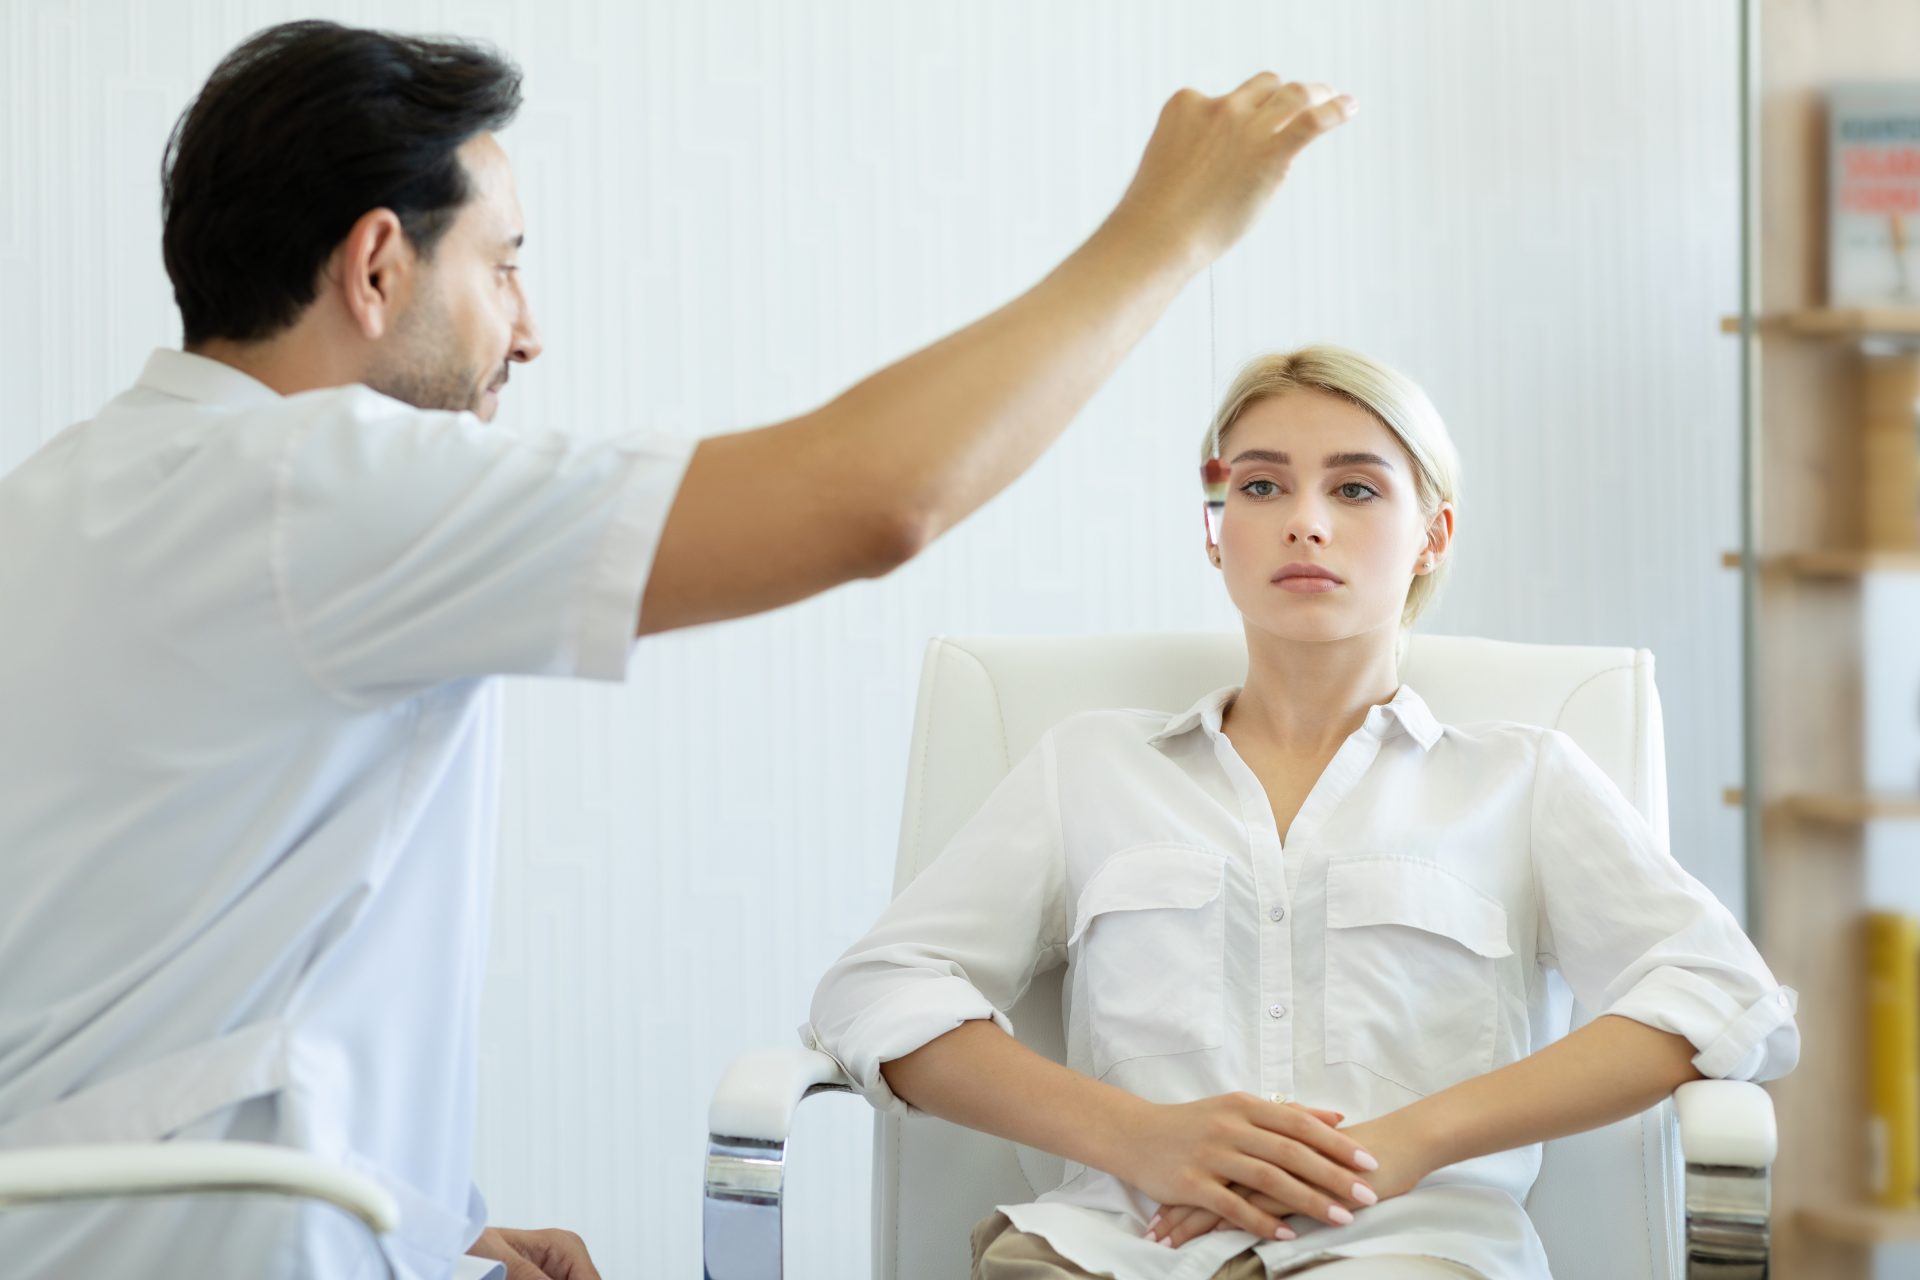 Would you be willing to try hypnosis instead of general anesthesia?